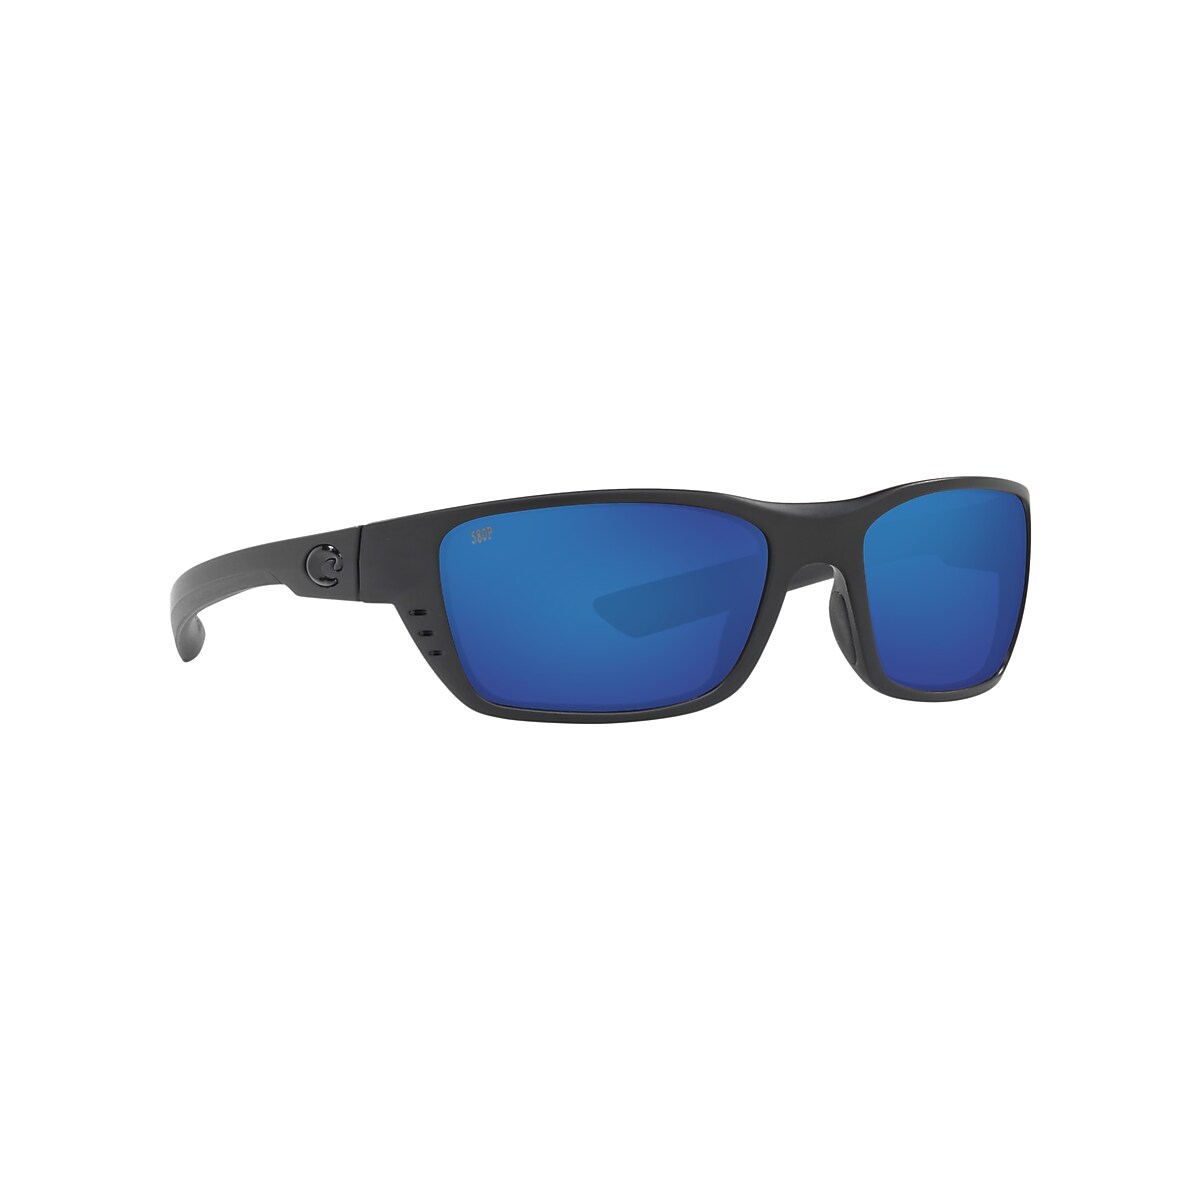 Whitetip Readers Polarized Sunglasses in Blue Mirror